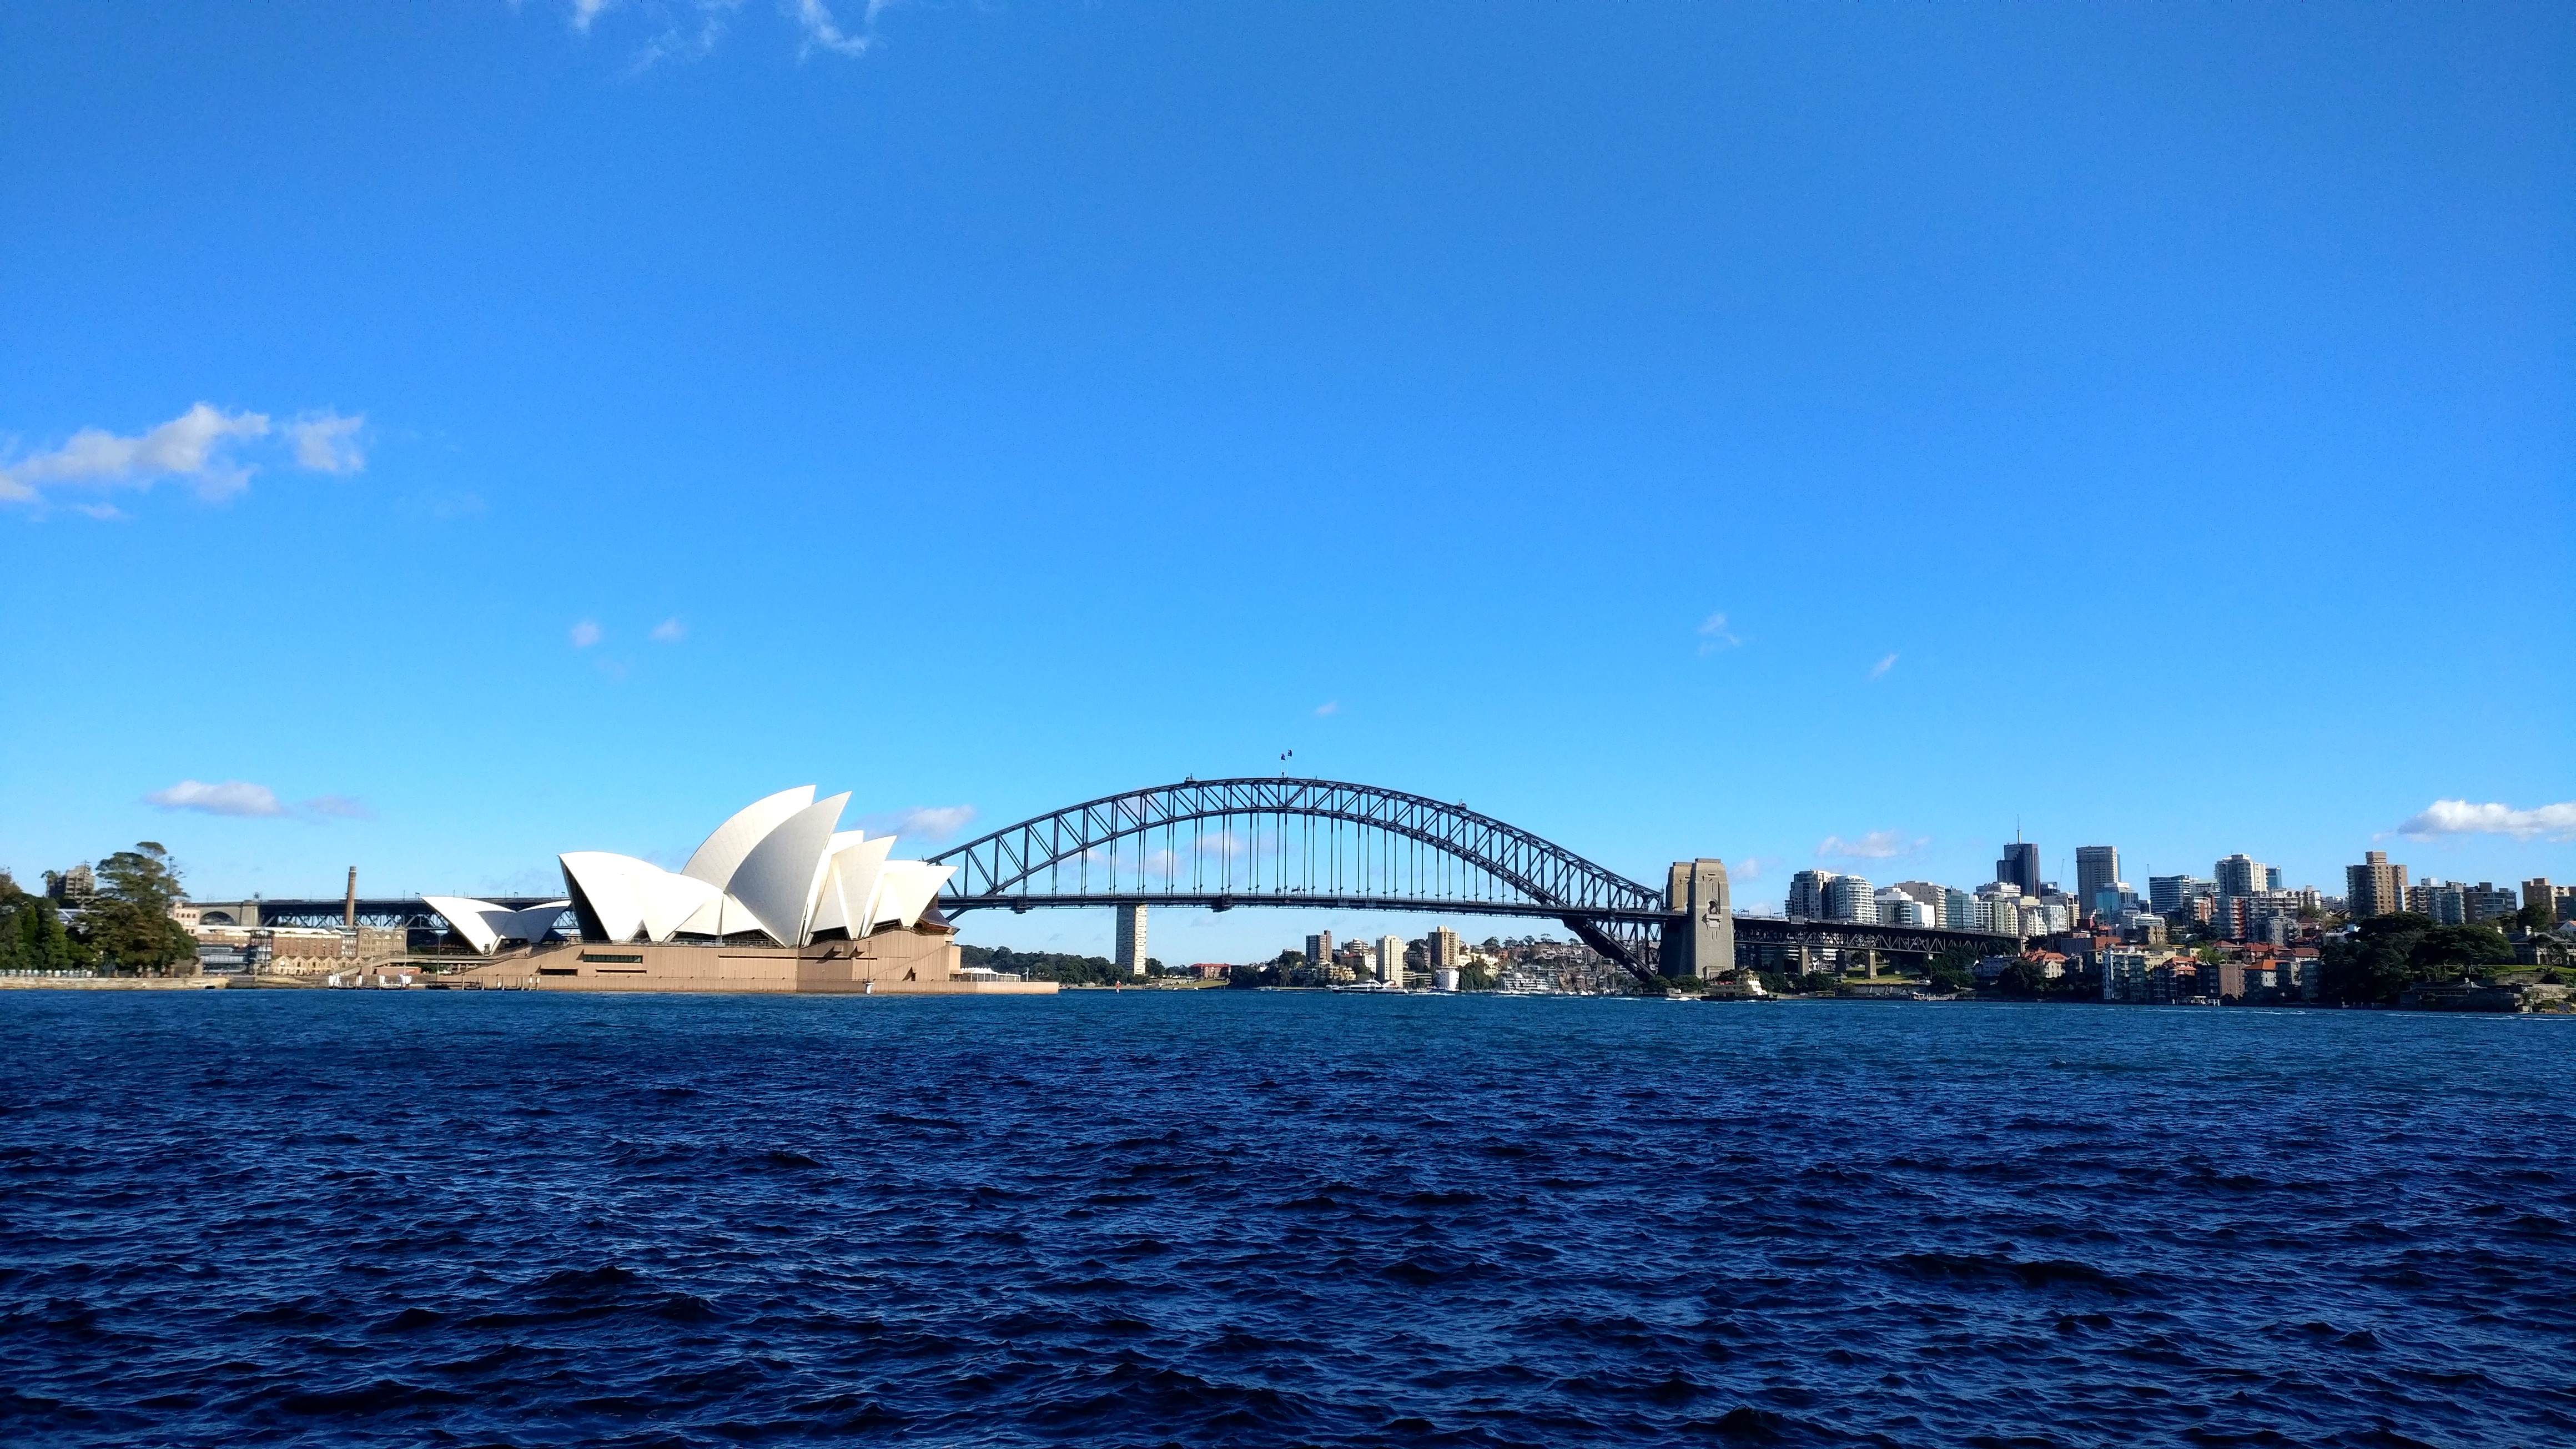 Things not to miss in Sydney